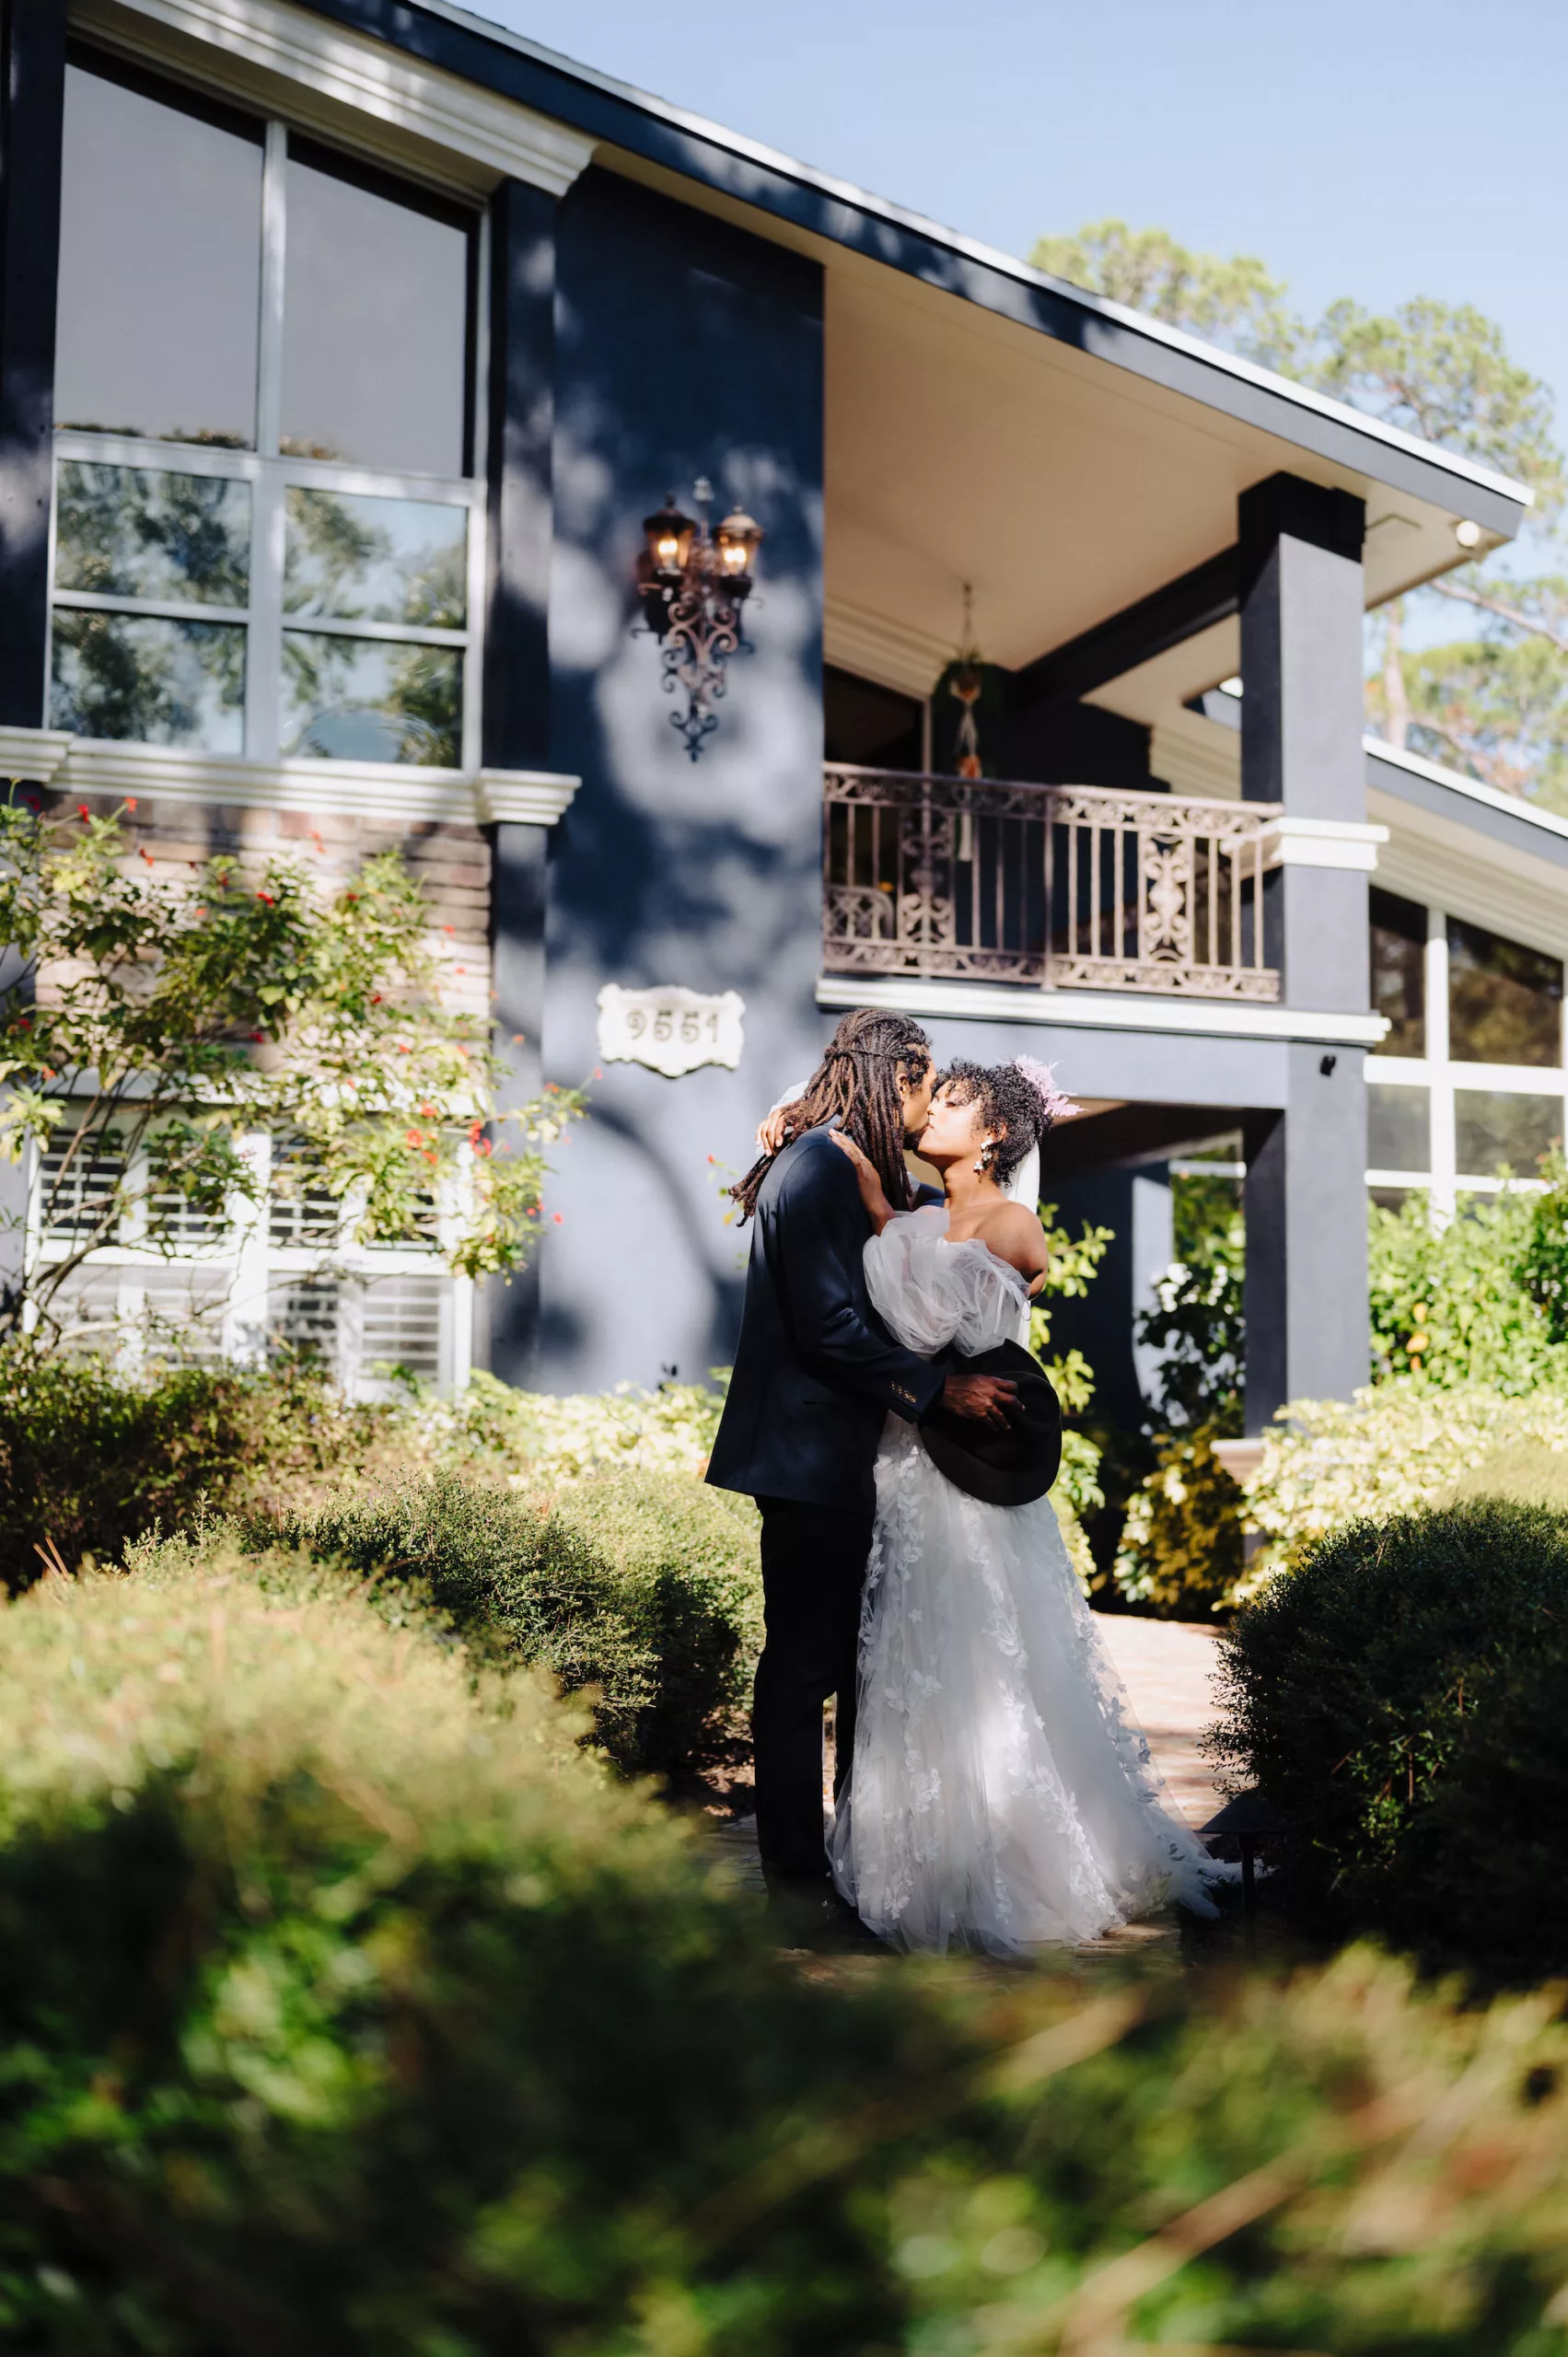 Bride and Groom First Look Wedding Portrait | Tampa Bay Photographer McNeile Photography | Content Creators Behind The Vows | Private Estate Wedding Venue Royal Pine Estate